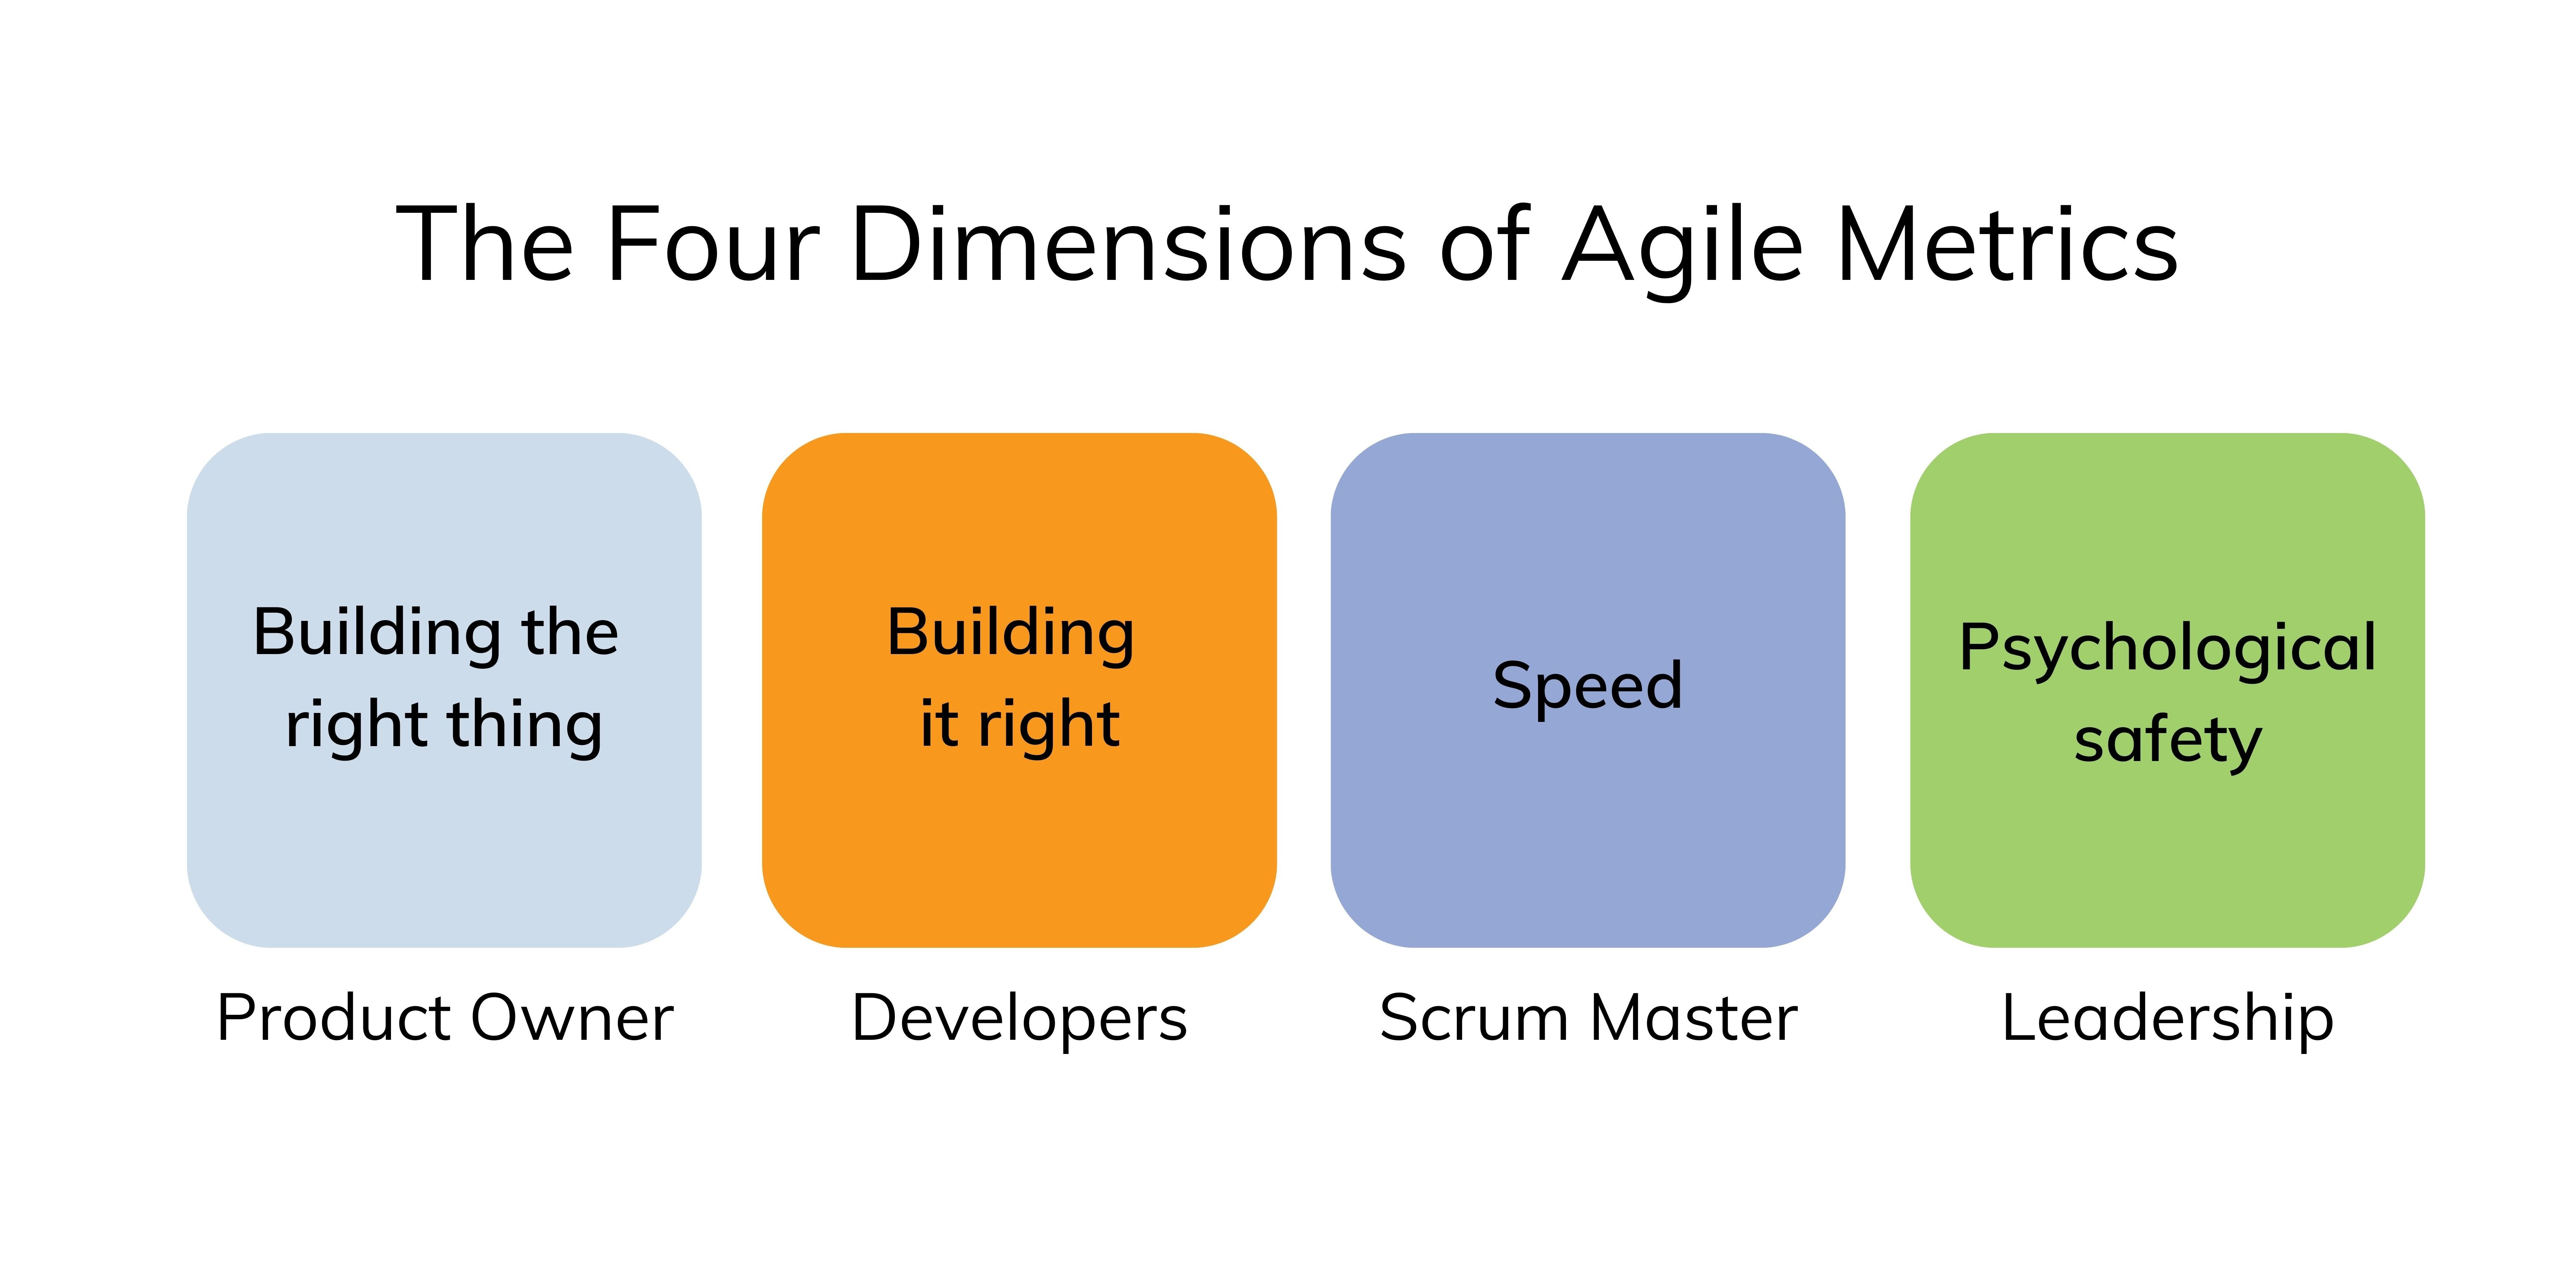 The Four Dimensions of Agile Metrics: Product Owner, Developers, Scrum Master, Leadership